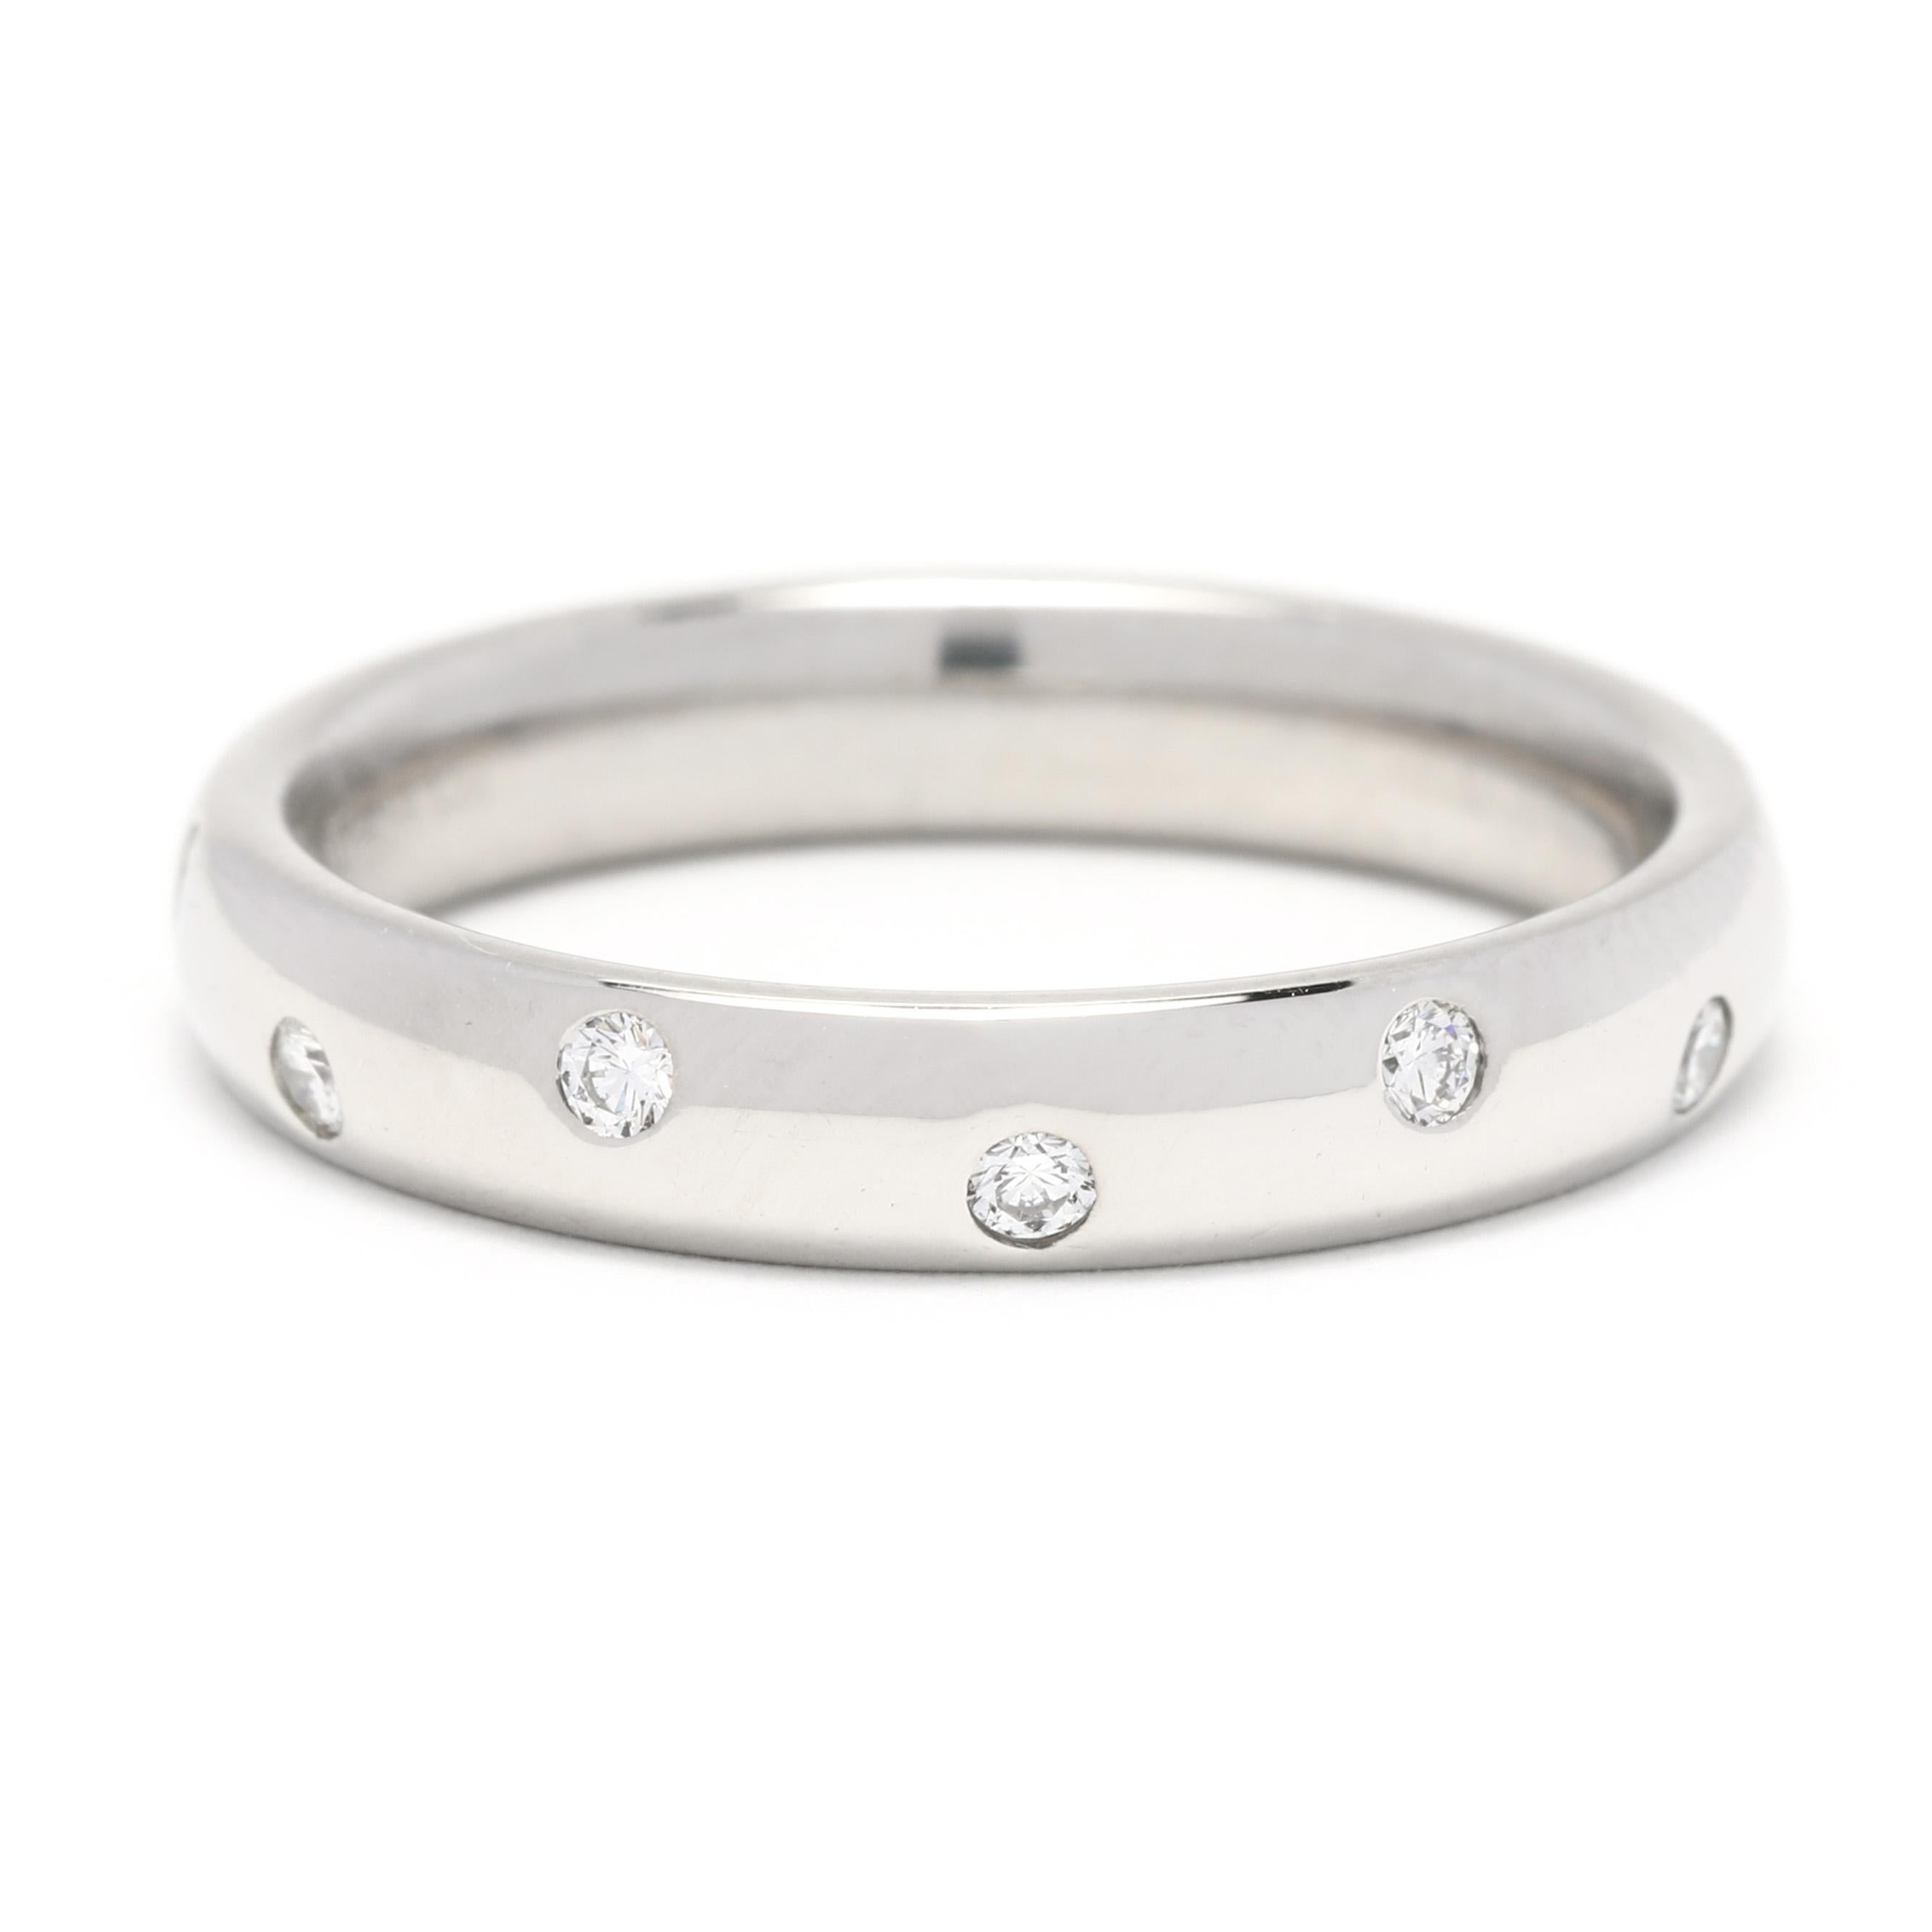 This stunning 0.25ctw scattered diamond wedding band is the perfect addition to any bridal look. Crafted in durable platinum, this stackable ring features 0.25 carats of sparkling diamonds set in a scattered pattern. The ring is a size 7.25, making